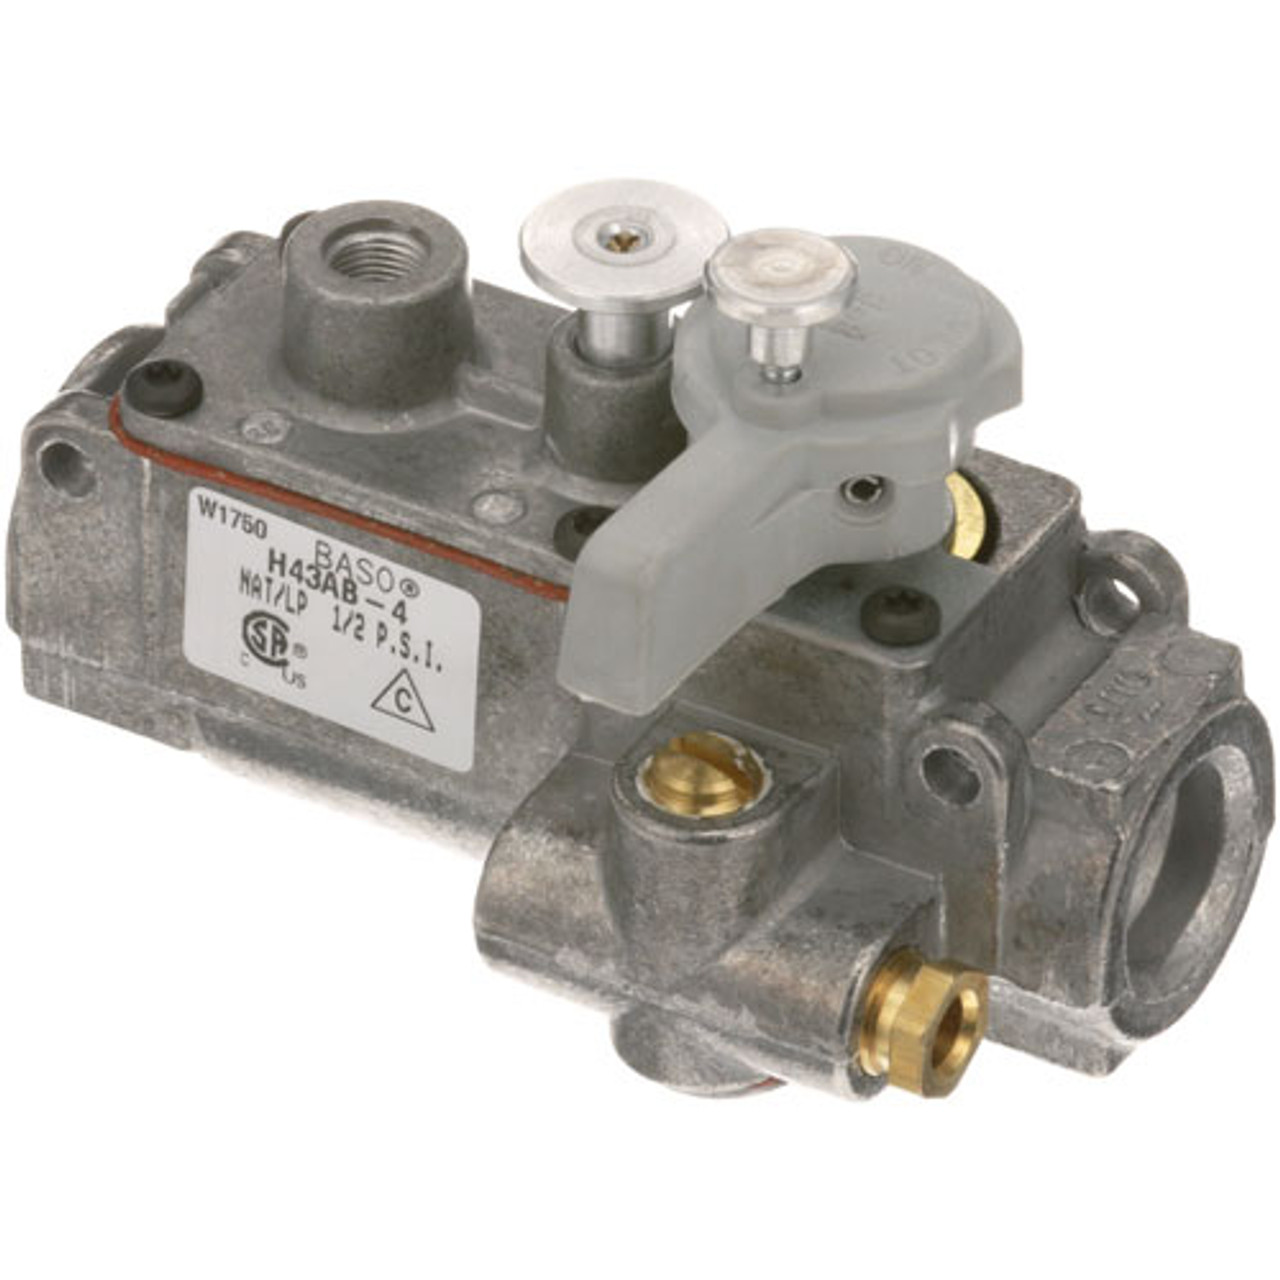 Gas Valve 3/8" - Replacement Part For Hickory 180